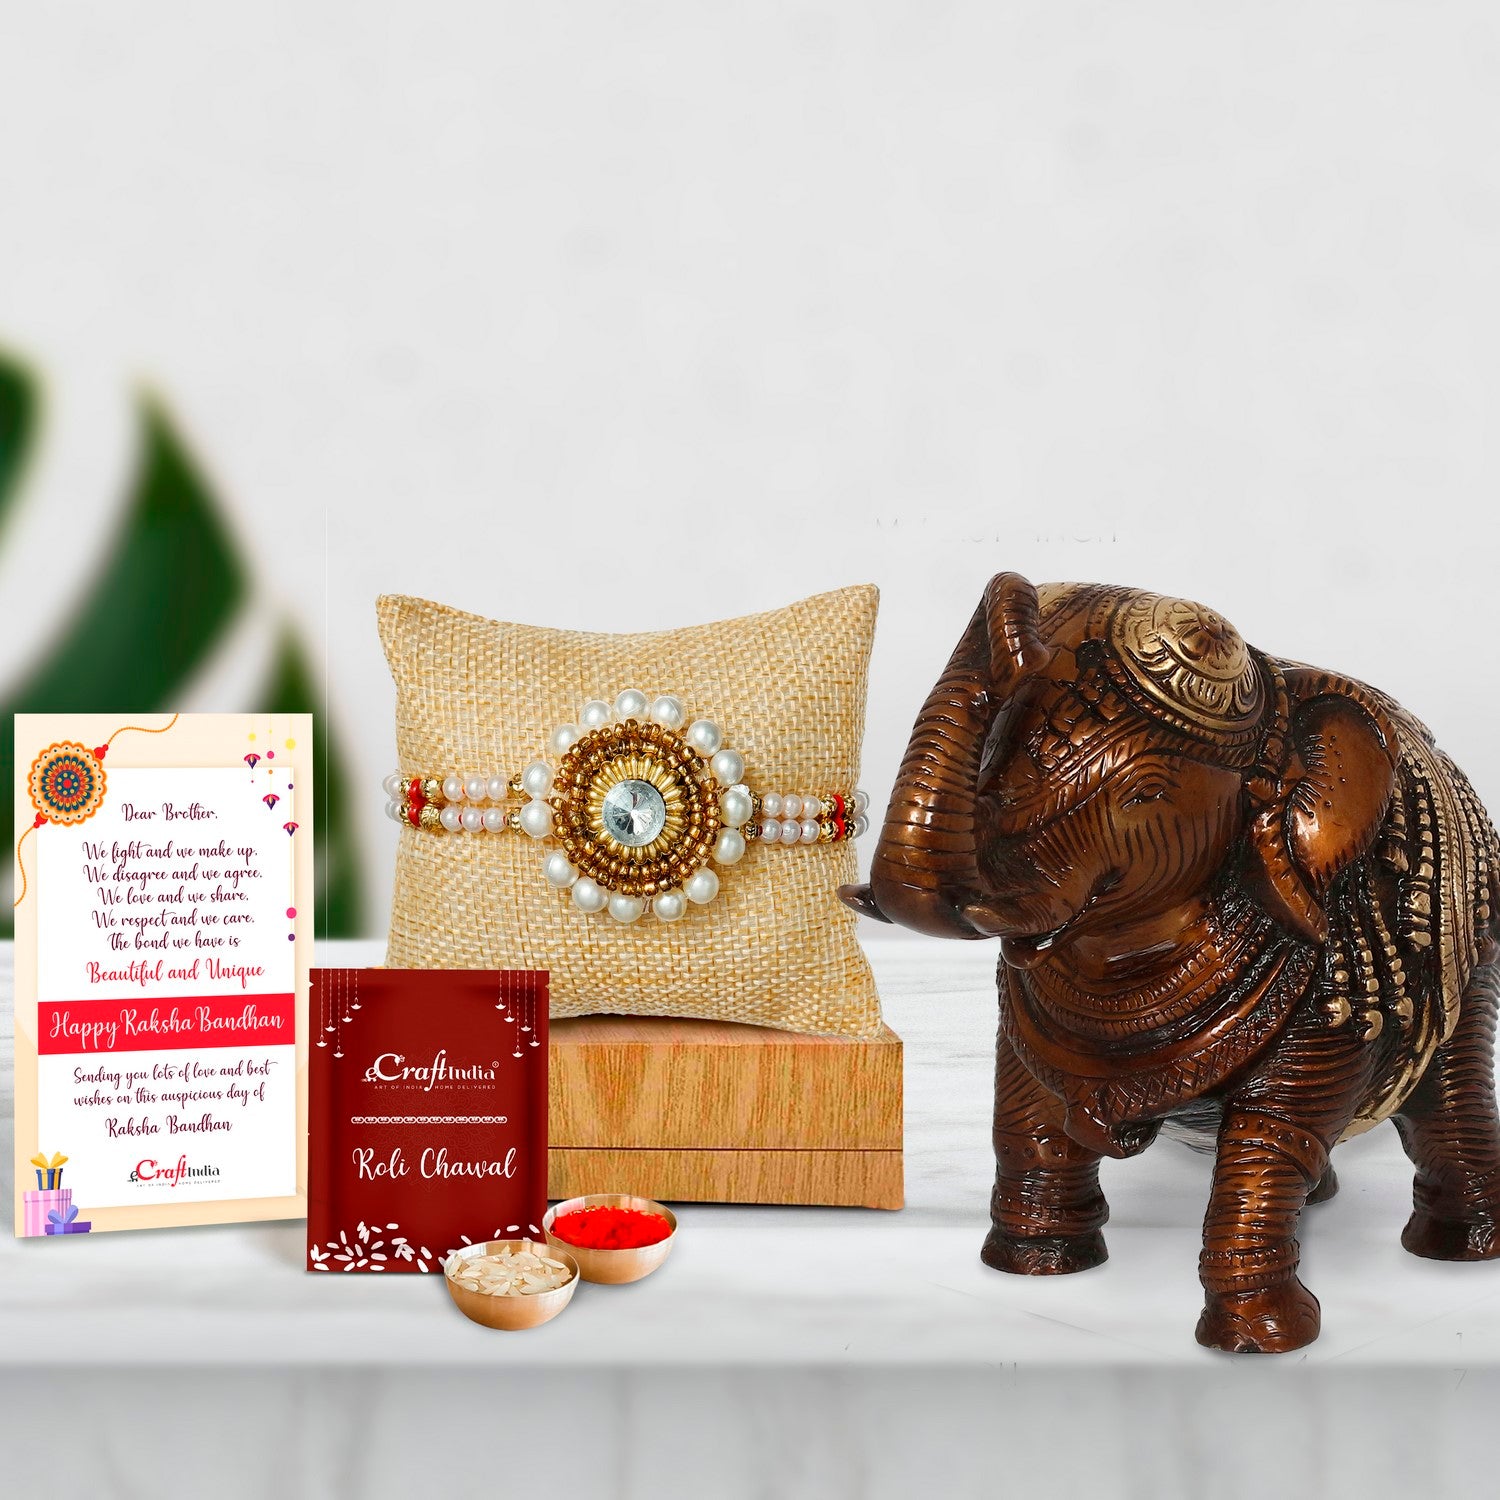 Designer Handcrafted Stone Pearl Rakhi with Antique Finish Decorative Brass Elephant Fingurine and Roli Chawal Pack, Best Wishes Greeting Card